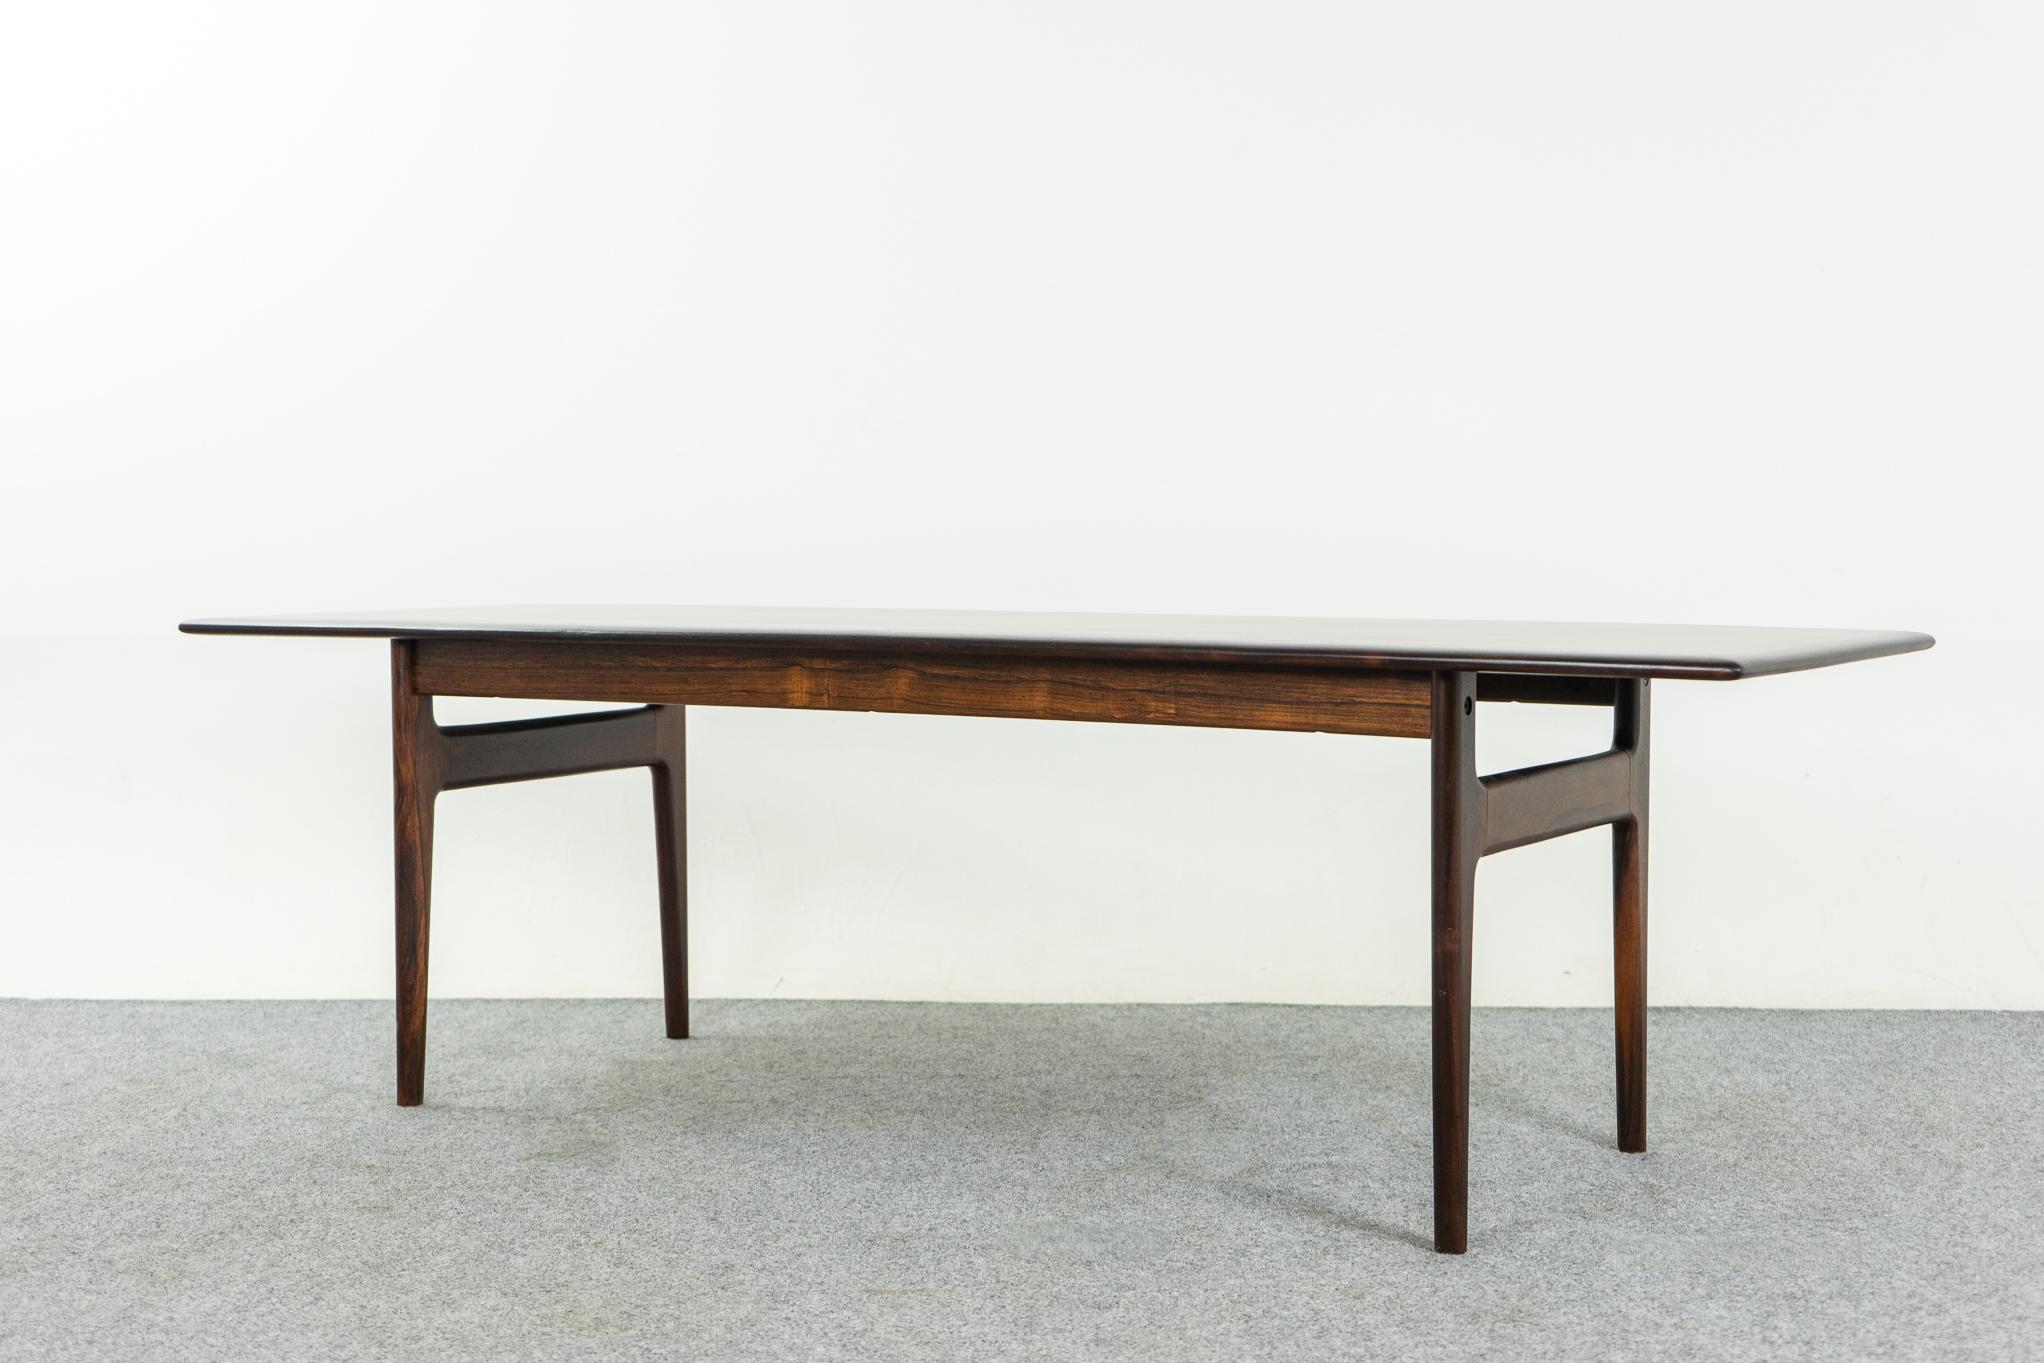 Rosewood Danish coffee table by Johannes Andersen for CFC Silkeborg, circa 1960's. Beautiful book matched veneer on the top, solid wood curved edges along its length. CFC Silkeborg makers mark medallion intact. Stature!

Please inquire for